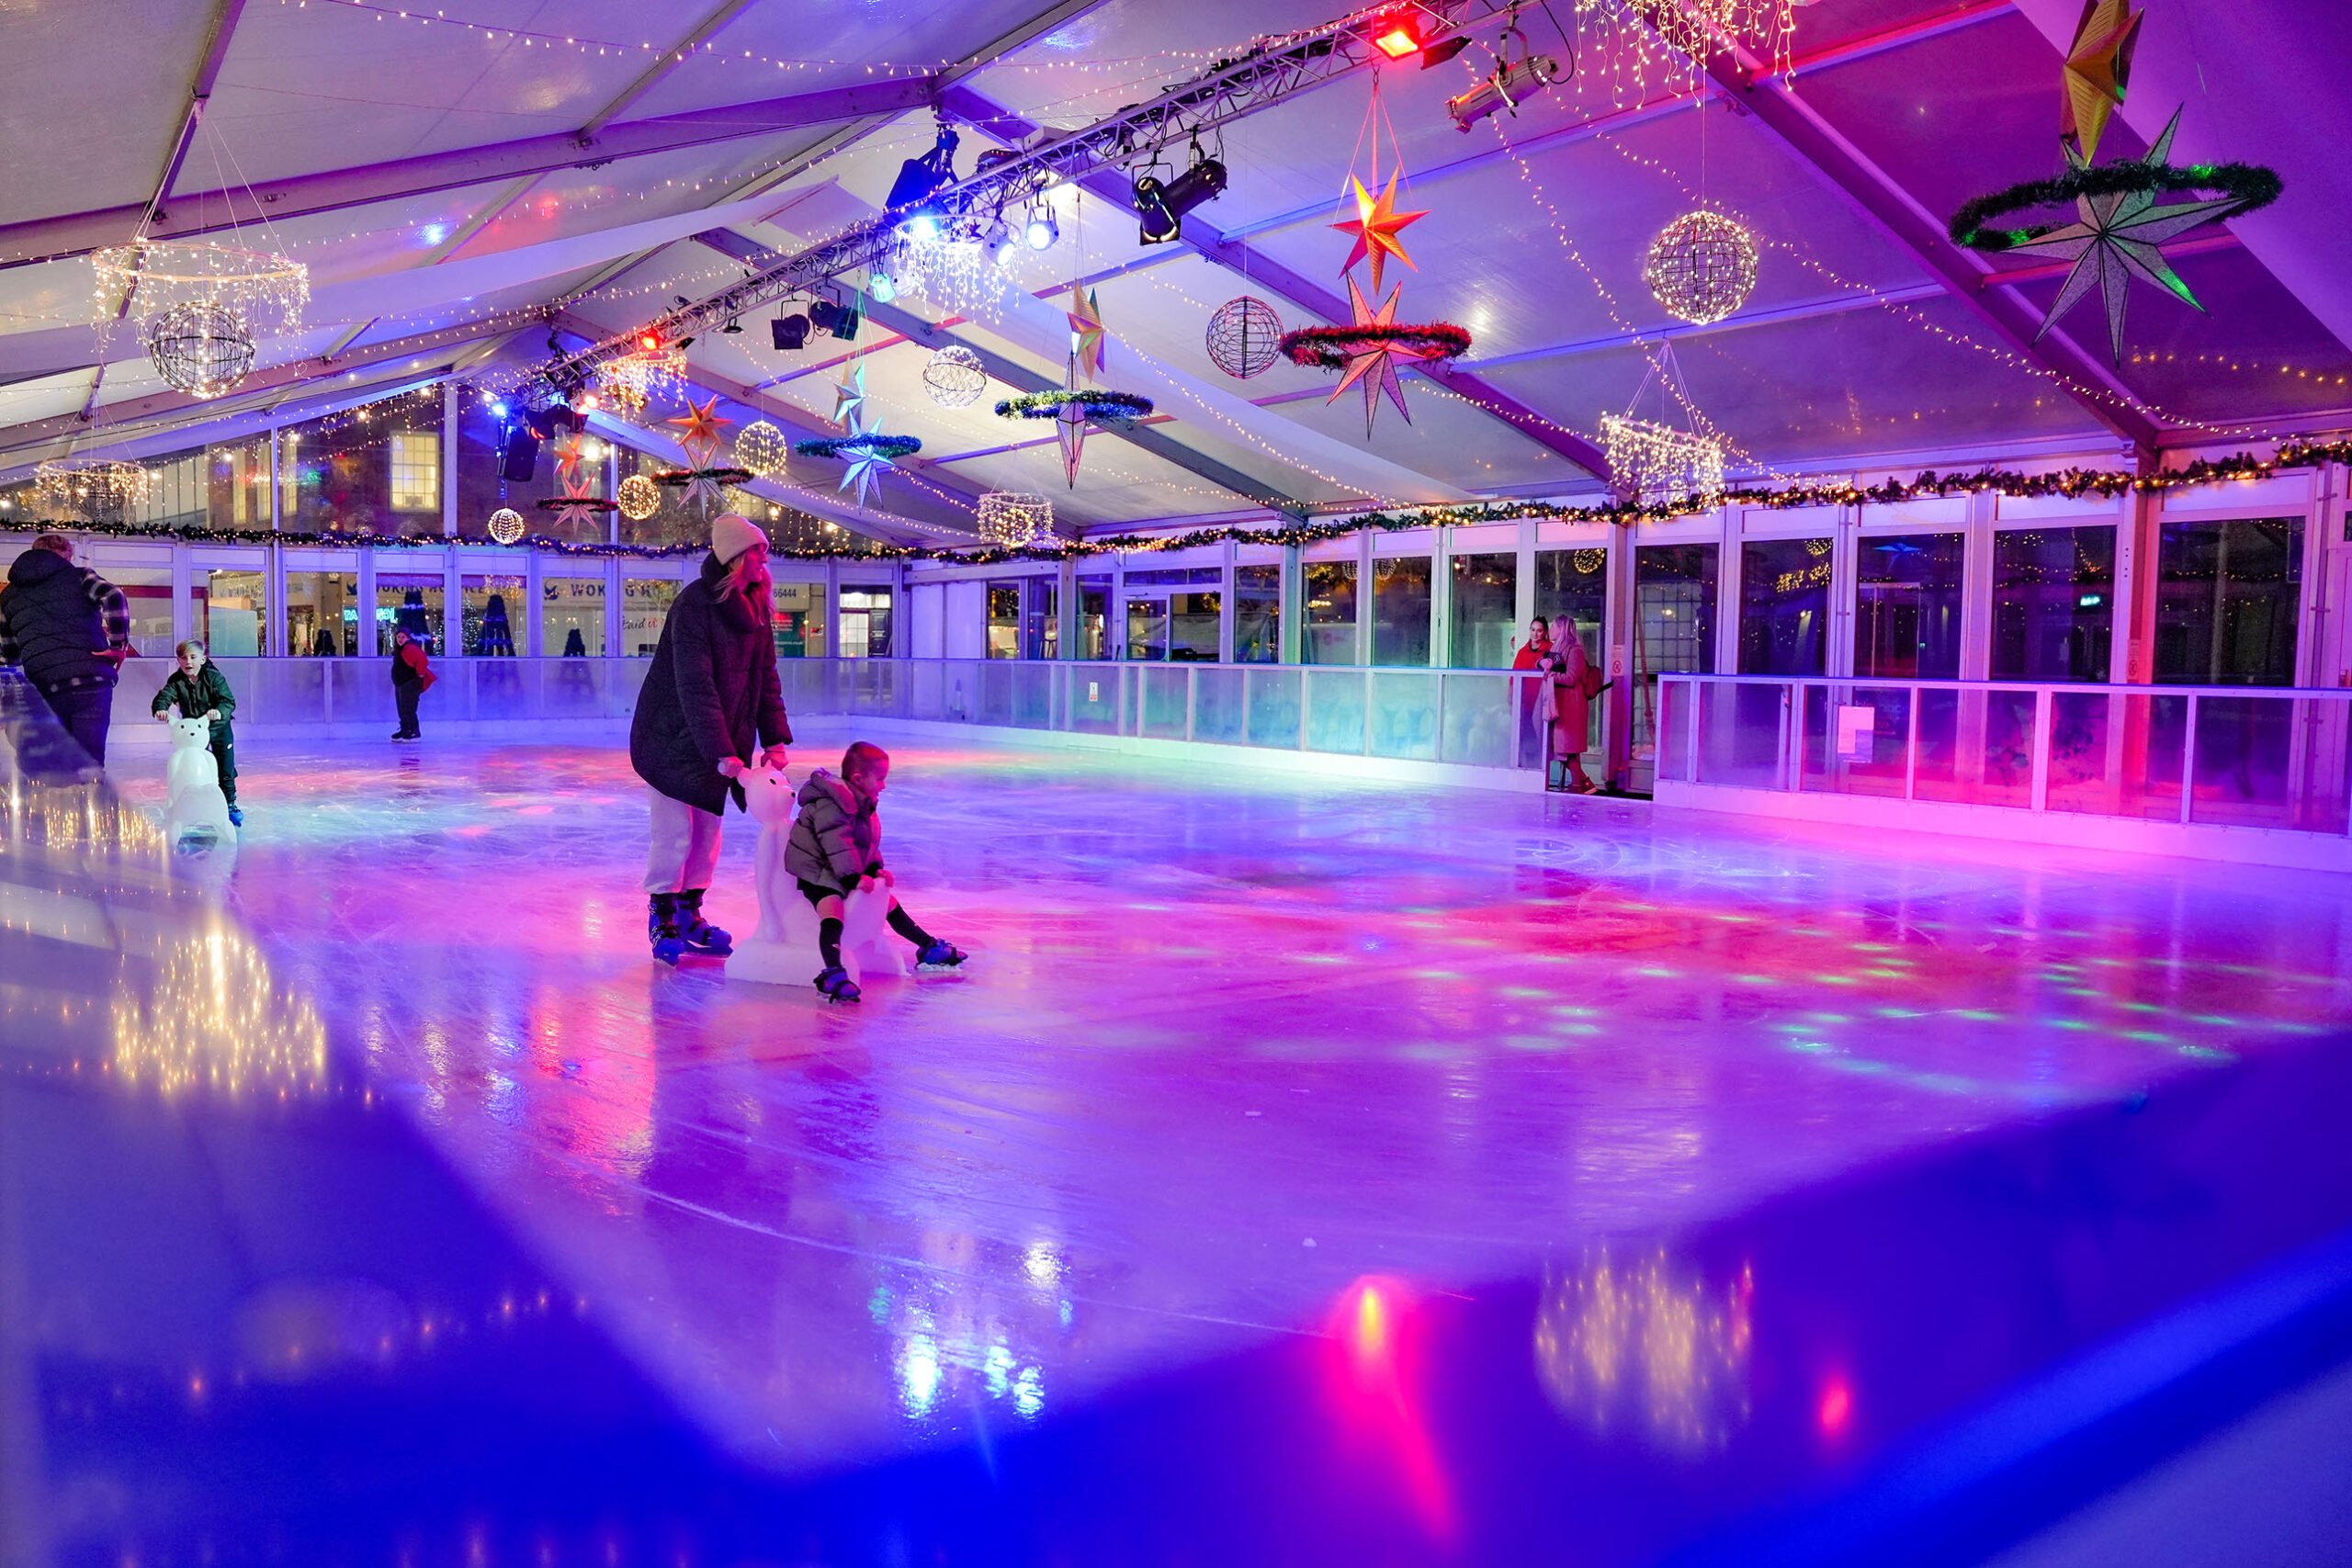 Lakeside ice skating comes to Willen Lake this Winter